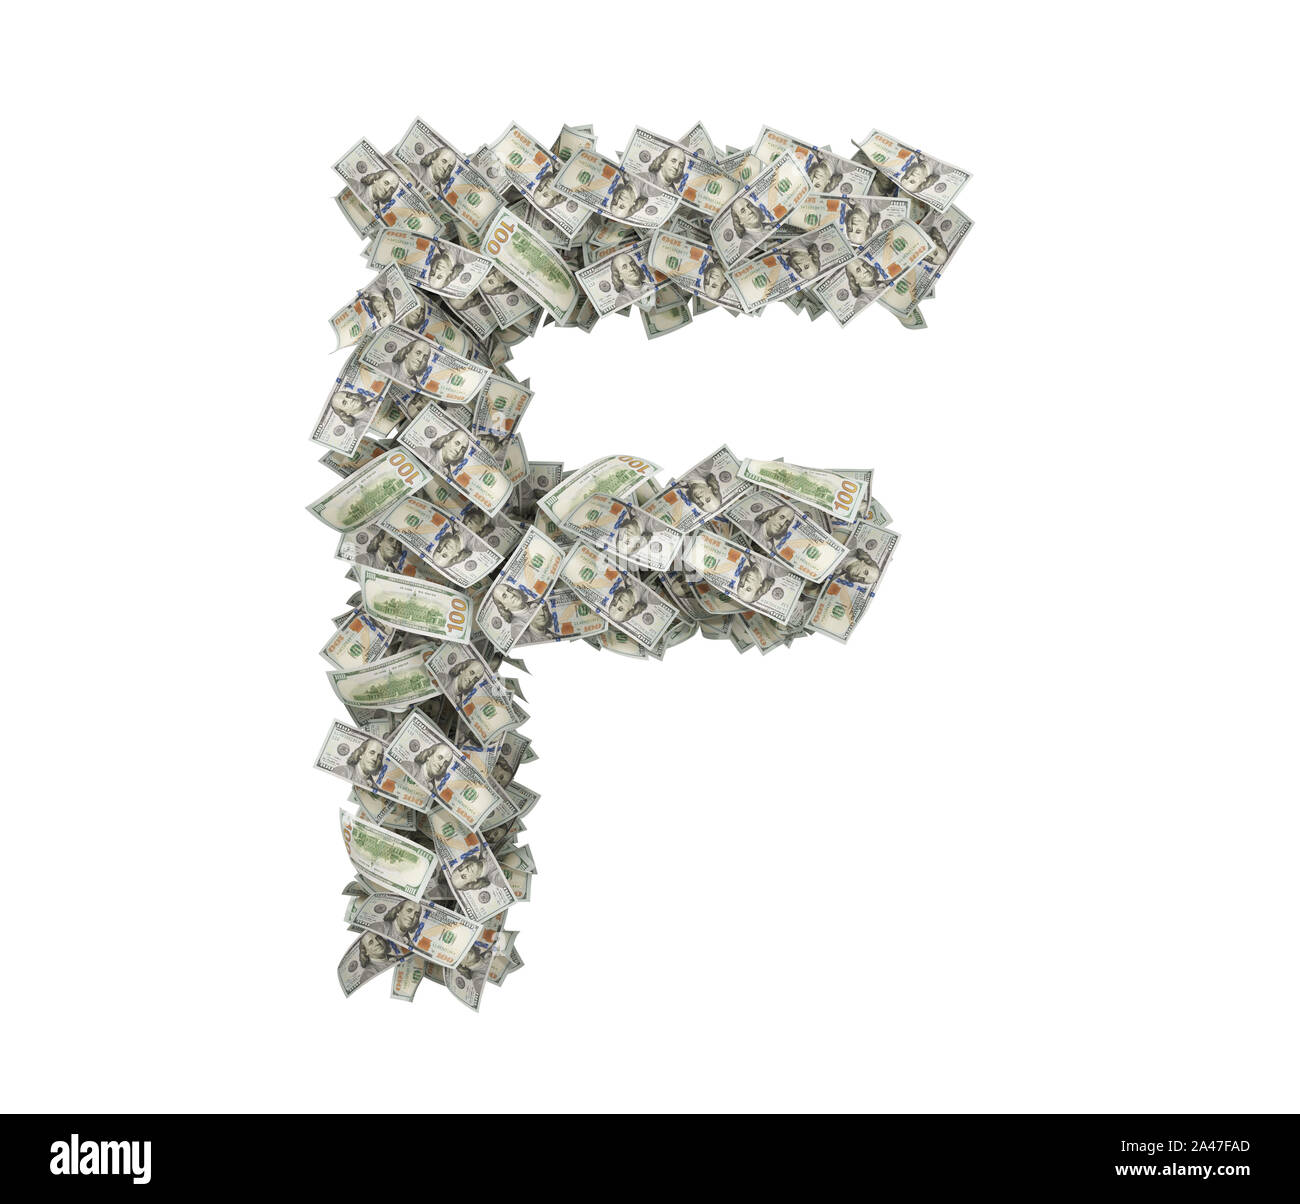 3d rendering of a large isolated large letter F made of many one hundred dollar bills. Money and bills. American currency. Alphabet and letters. Stock Photo